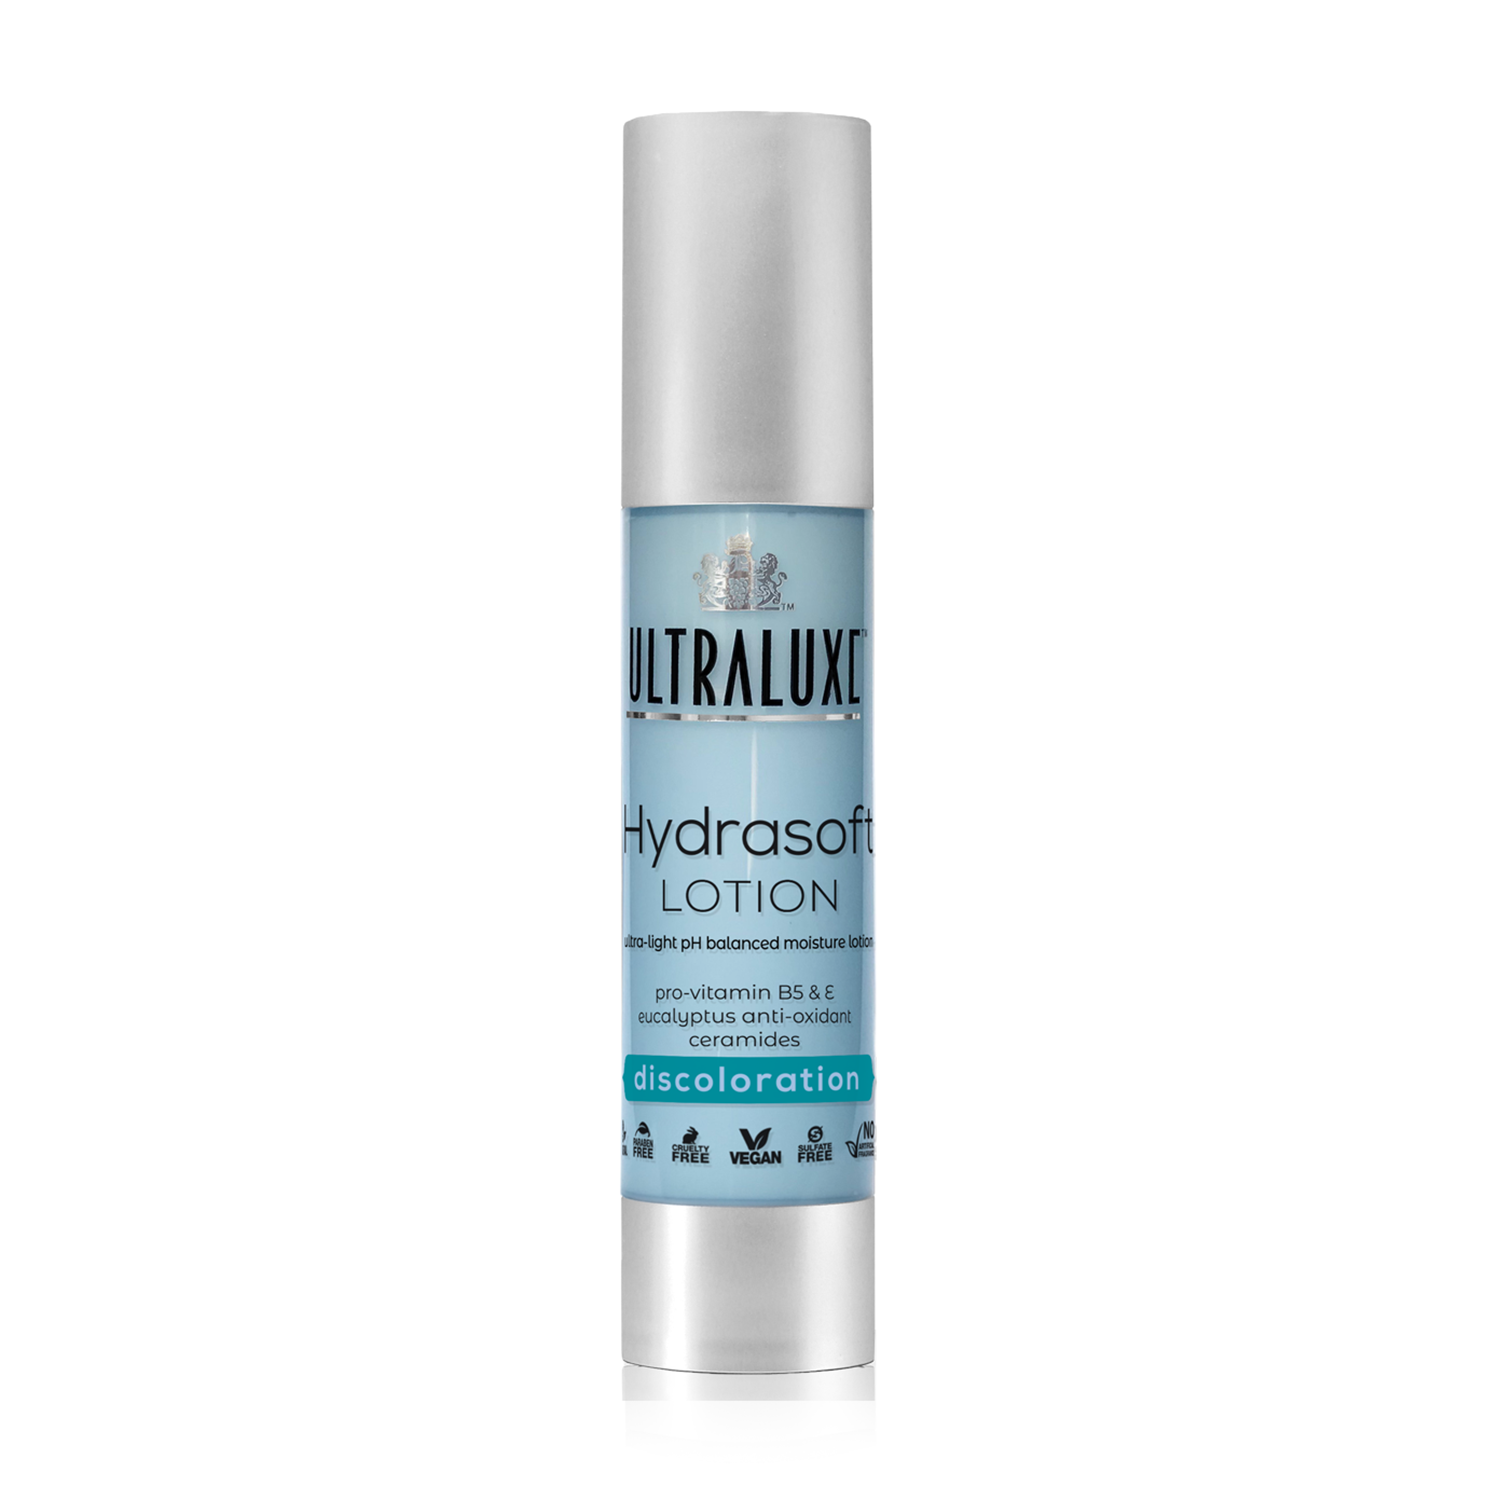 UltraLuxe Hydrasoft Lotion / DISCOLORATION